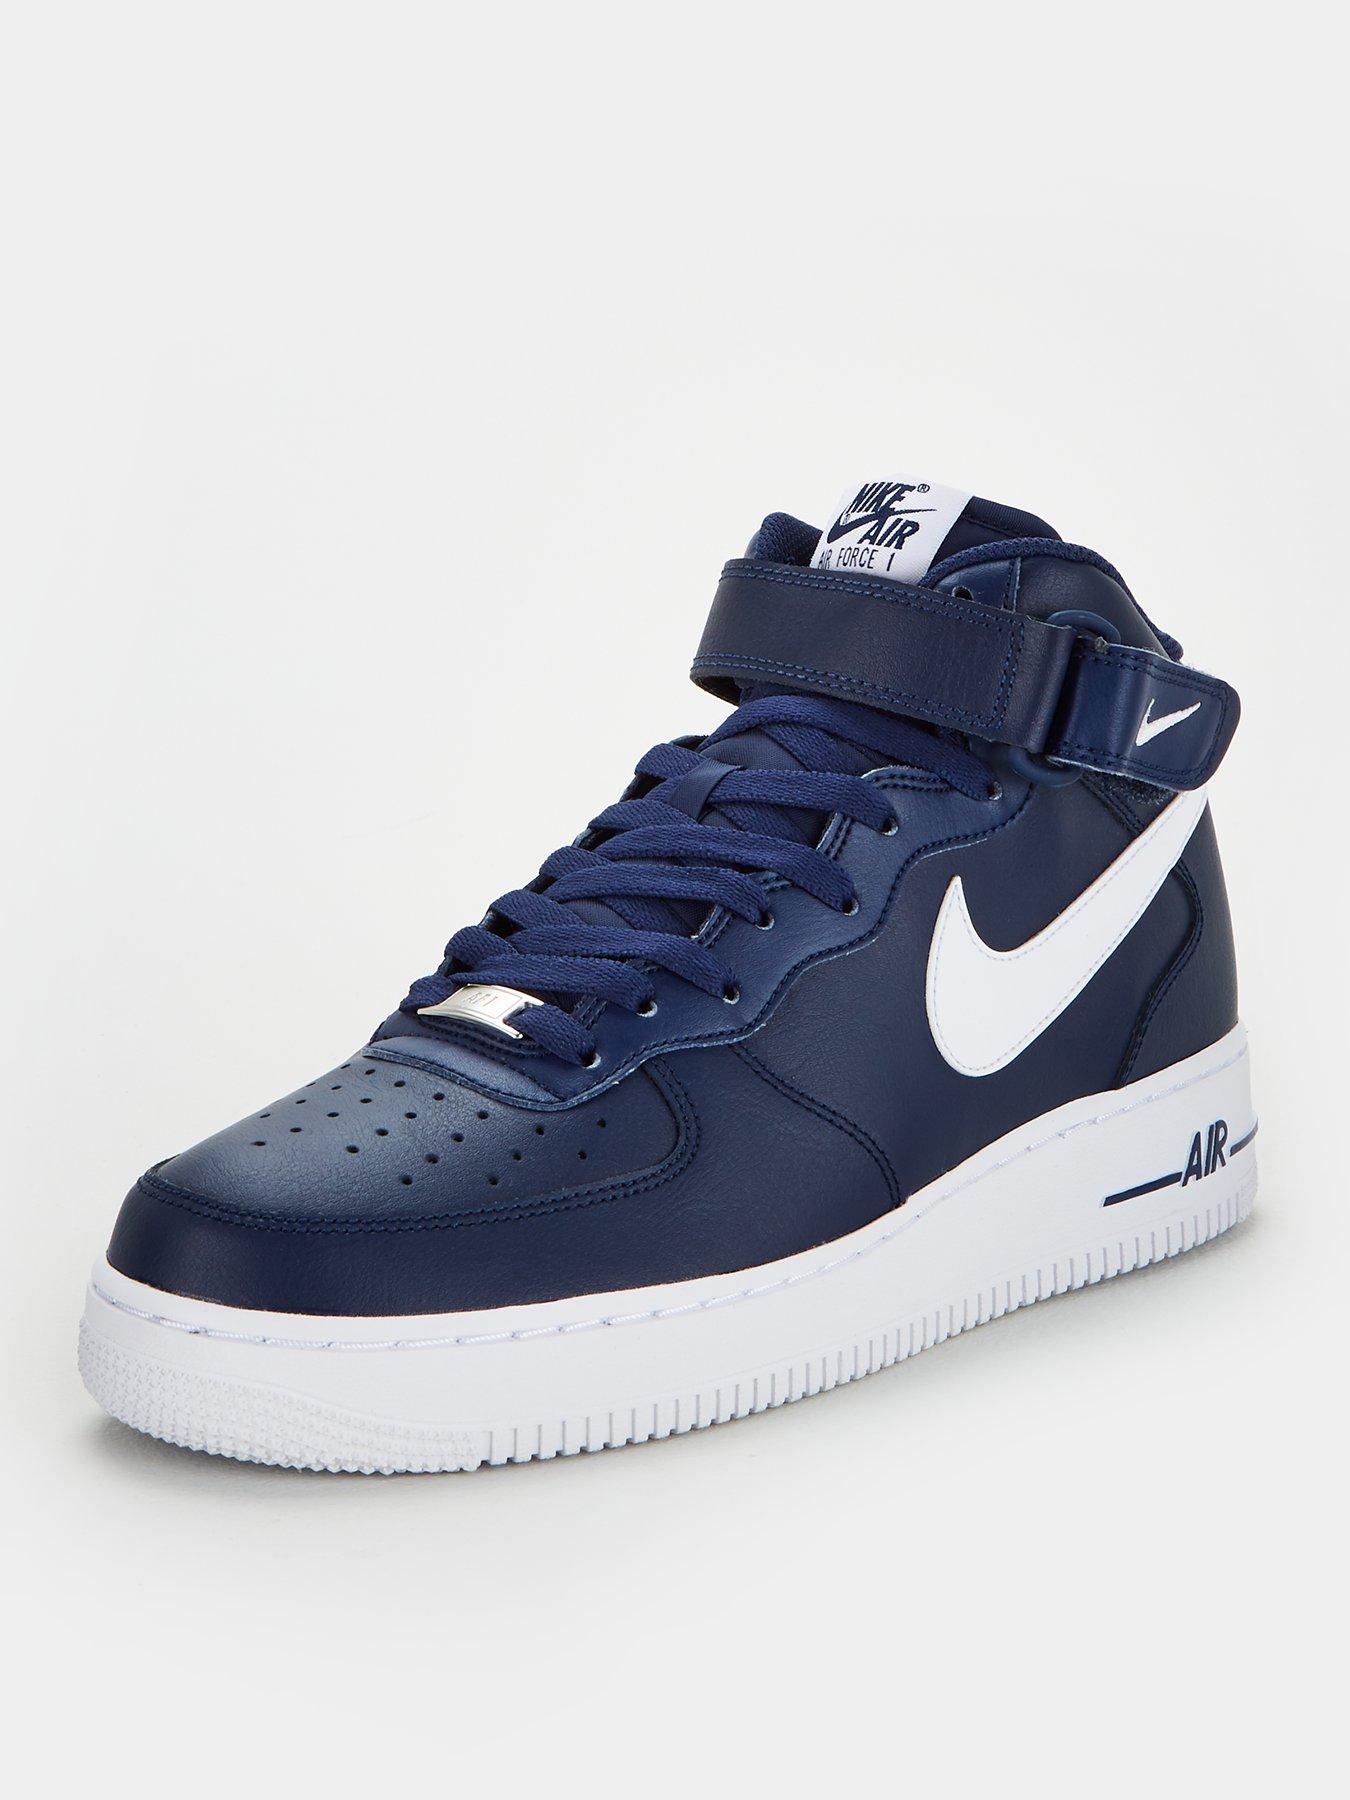 air force 1 navy and white